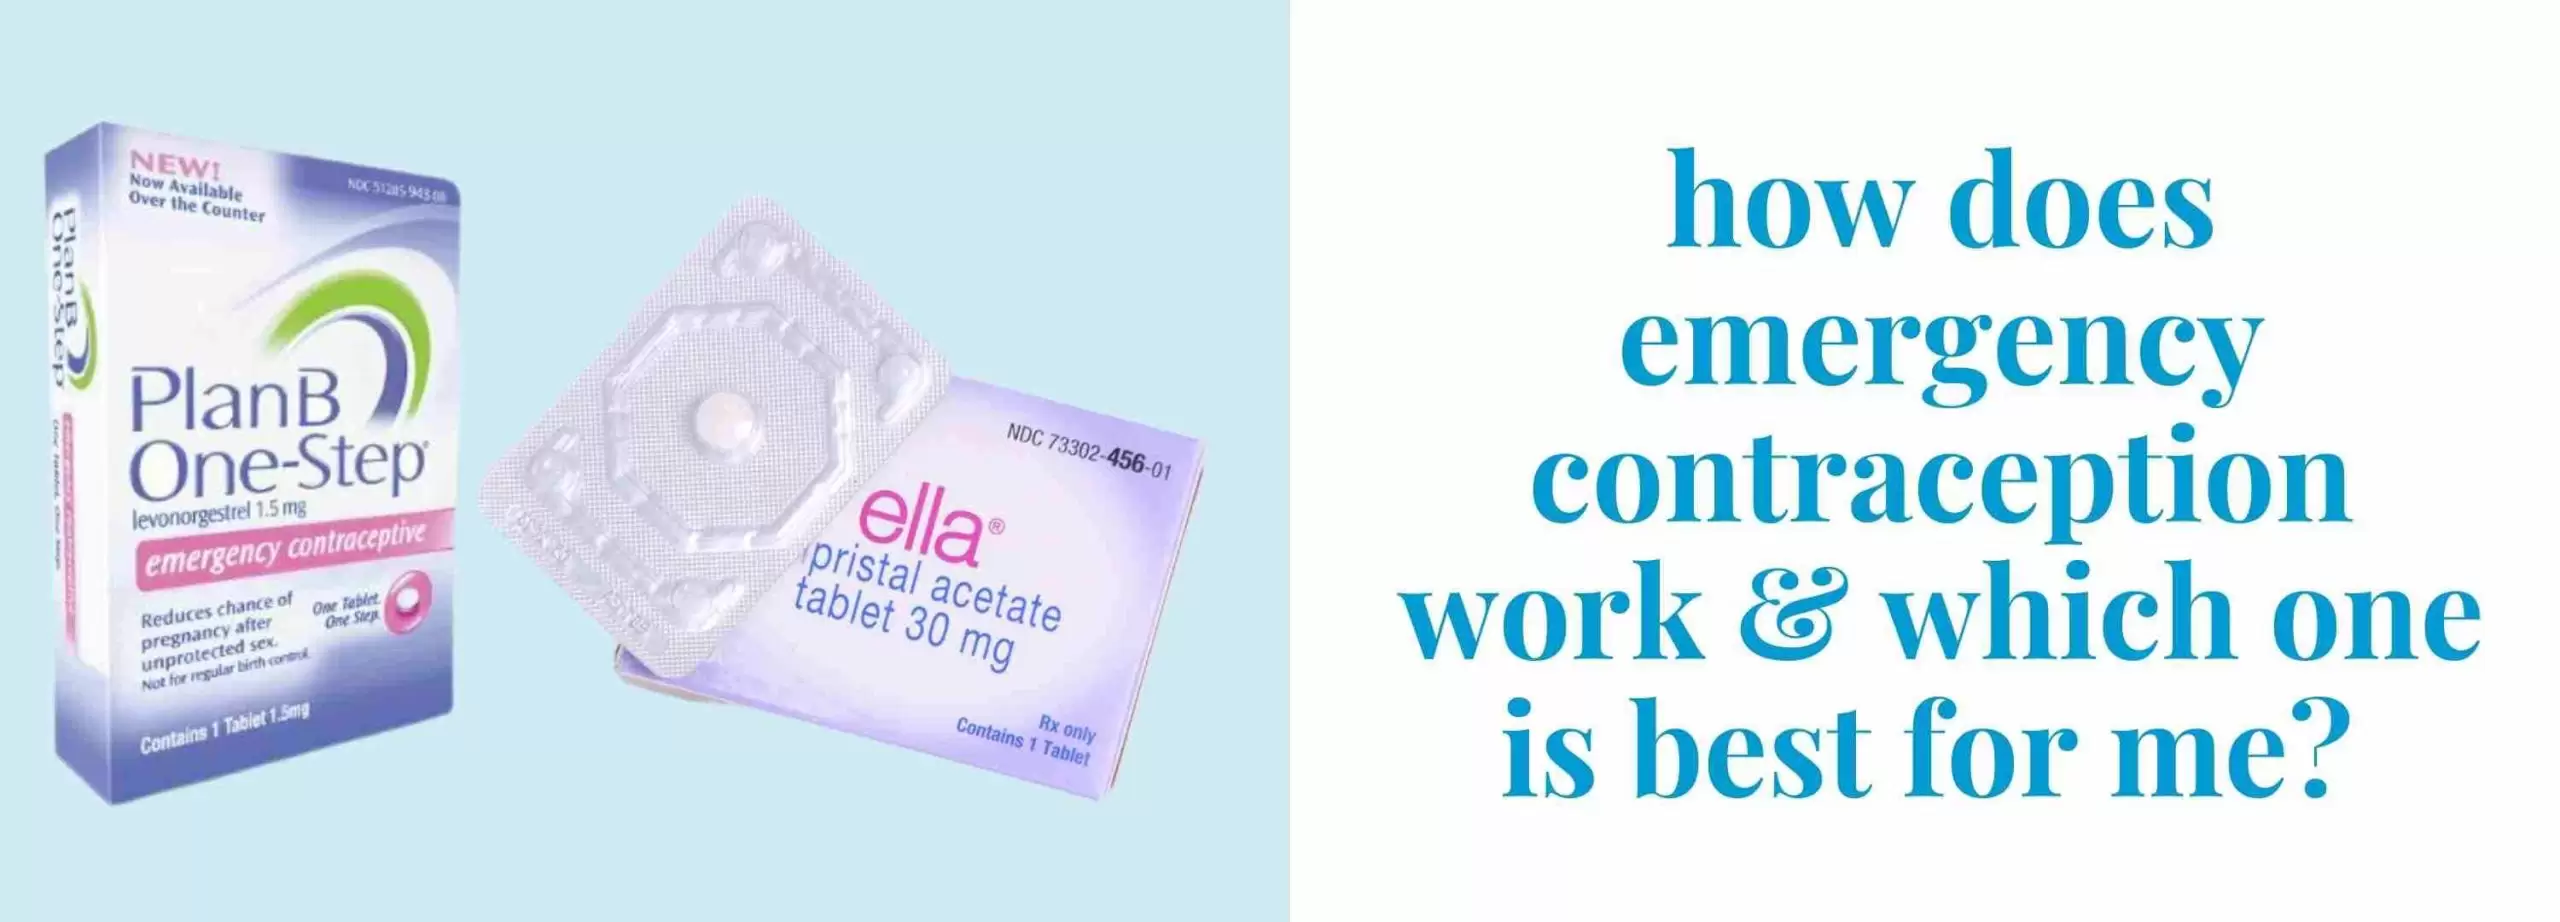 How does Emergency contraception work and which one is best for me